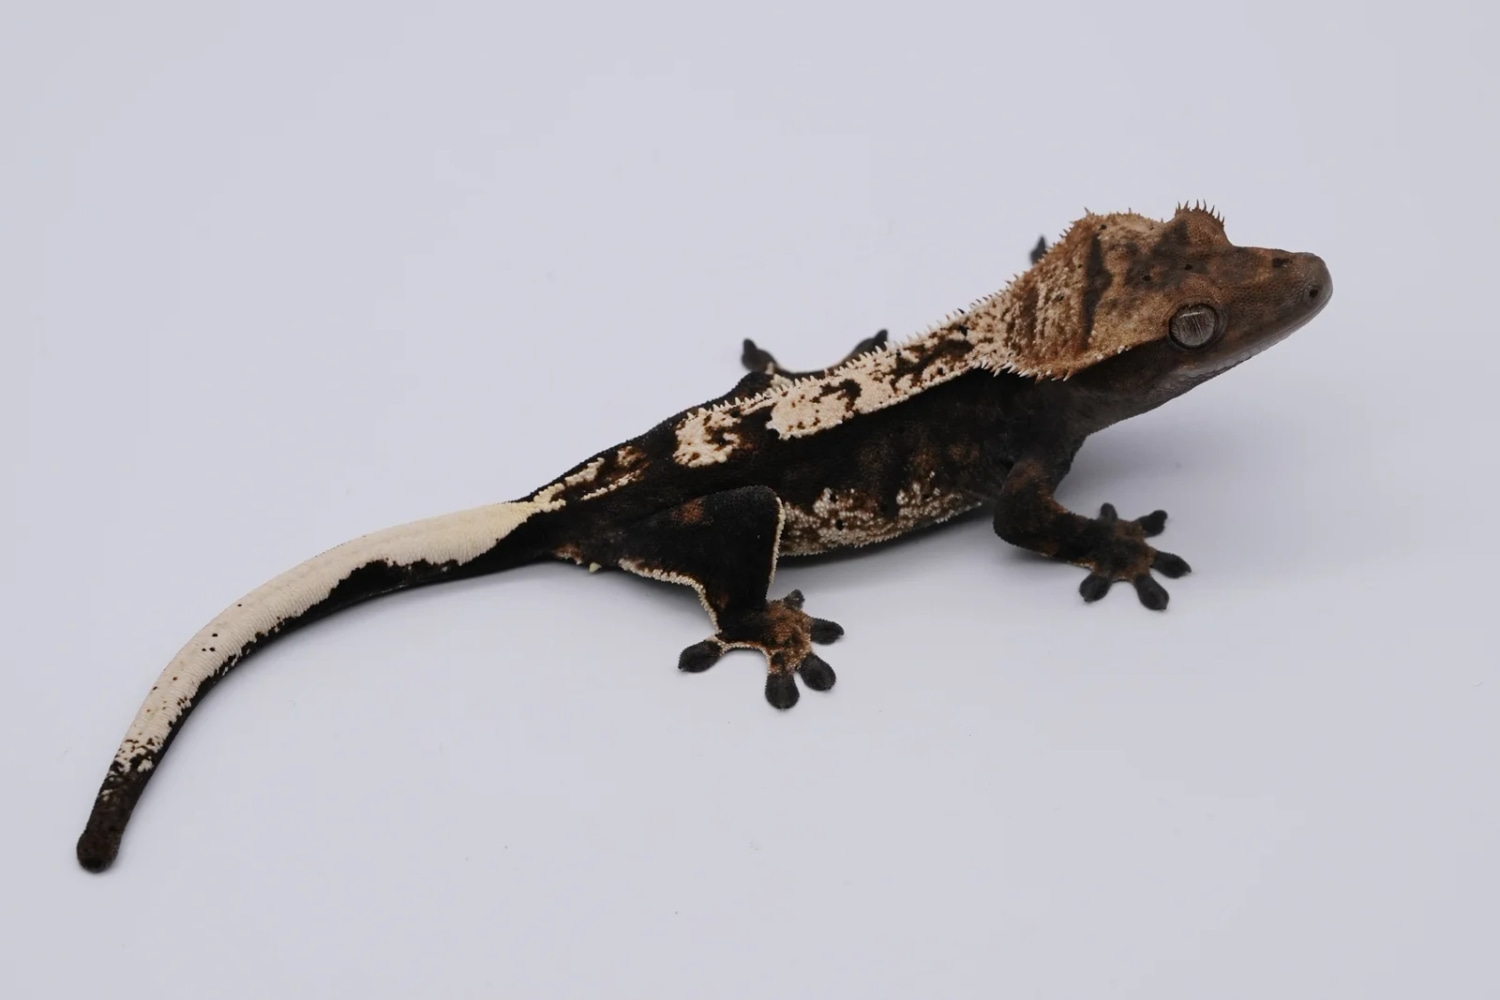 Female Charcoal Crested Gecko by Limited Edition Geckos CO LLC